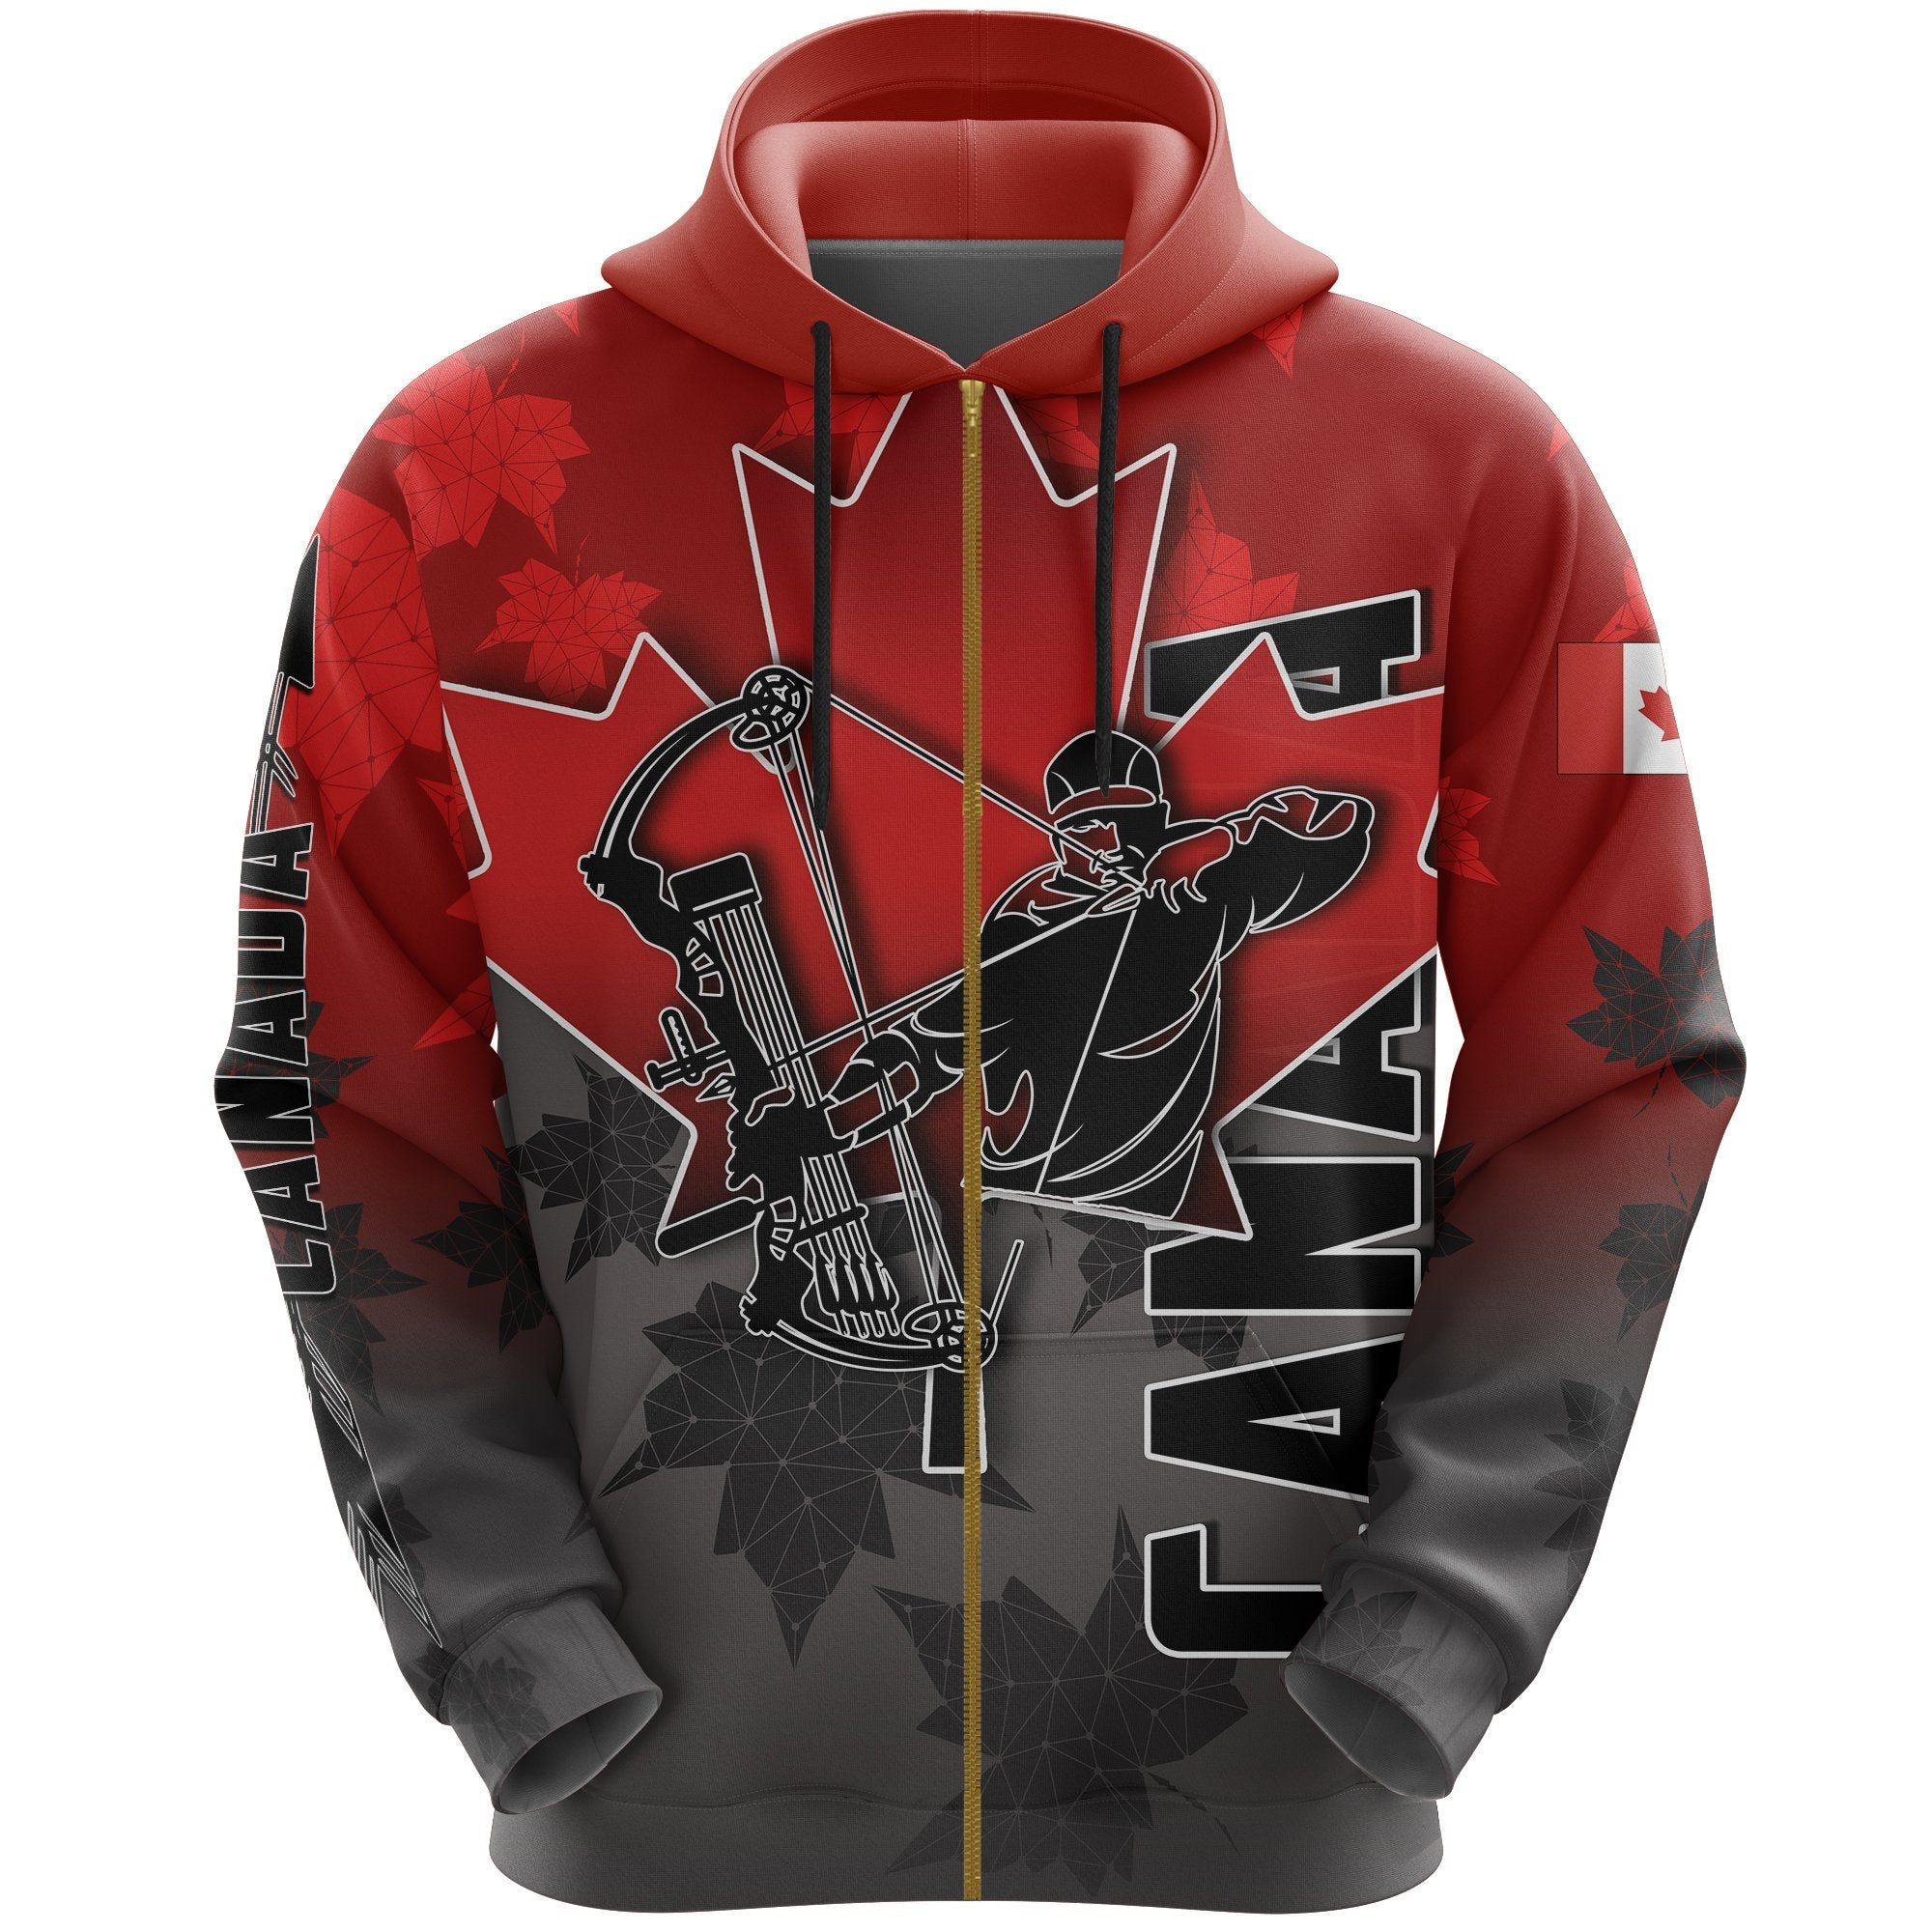 canada-all-over-zip-hoodie-archery-with-maple-leaf